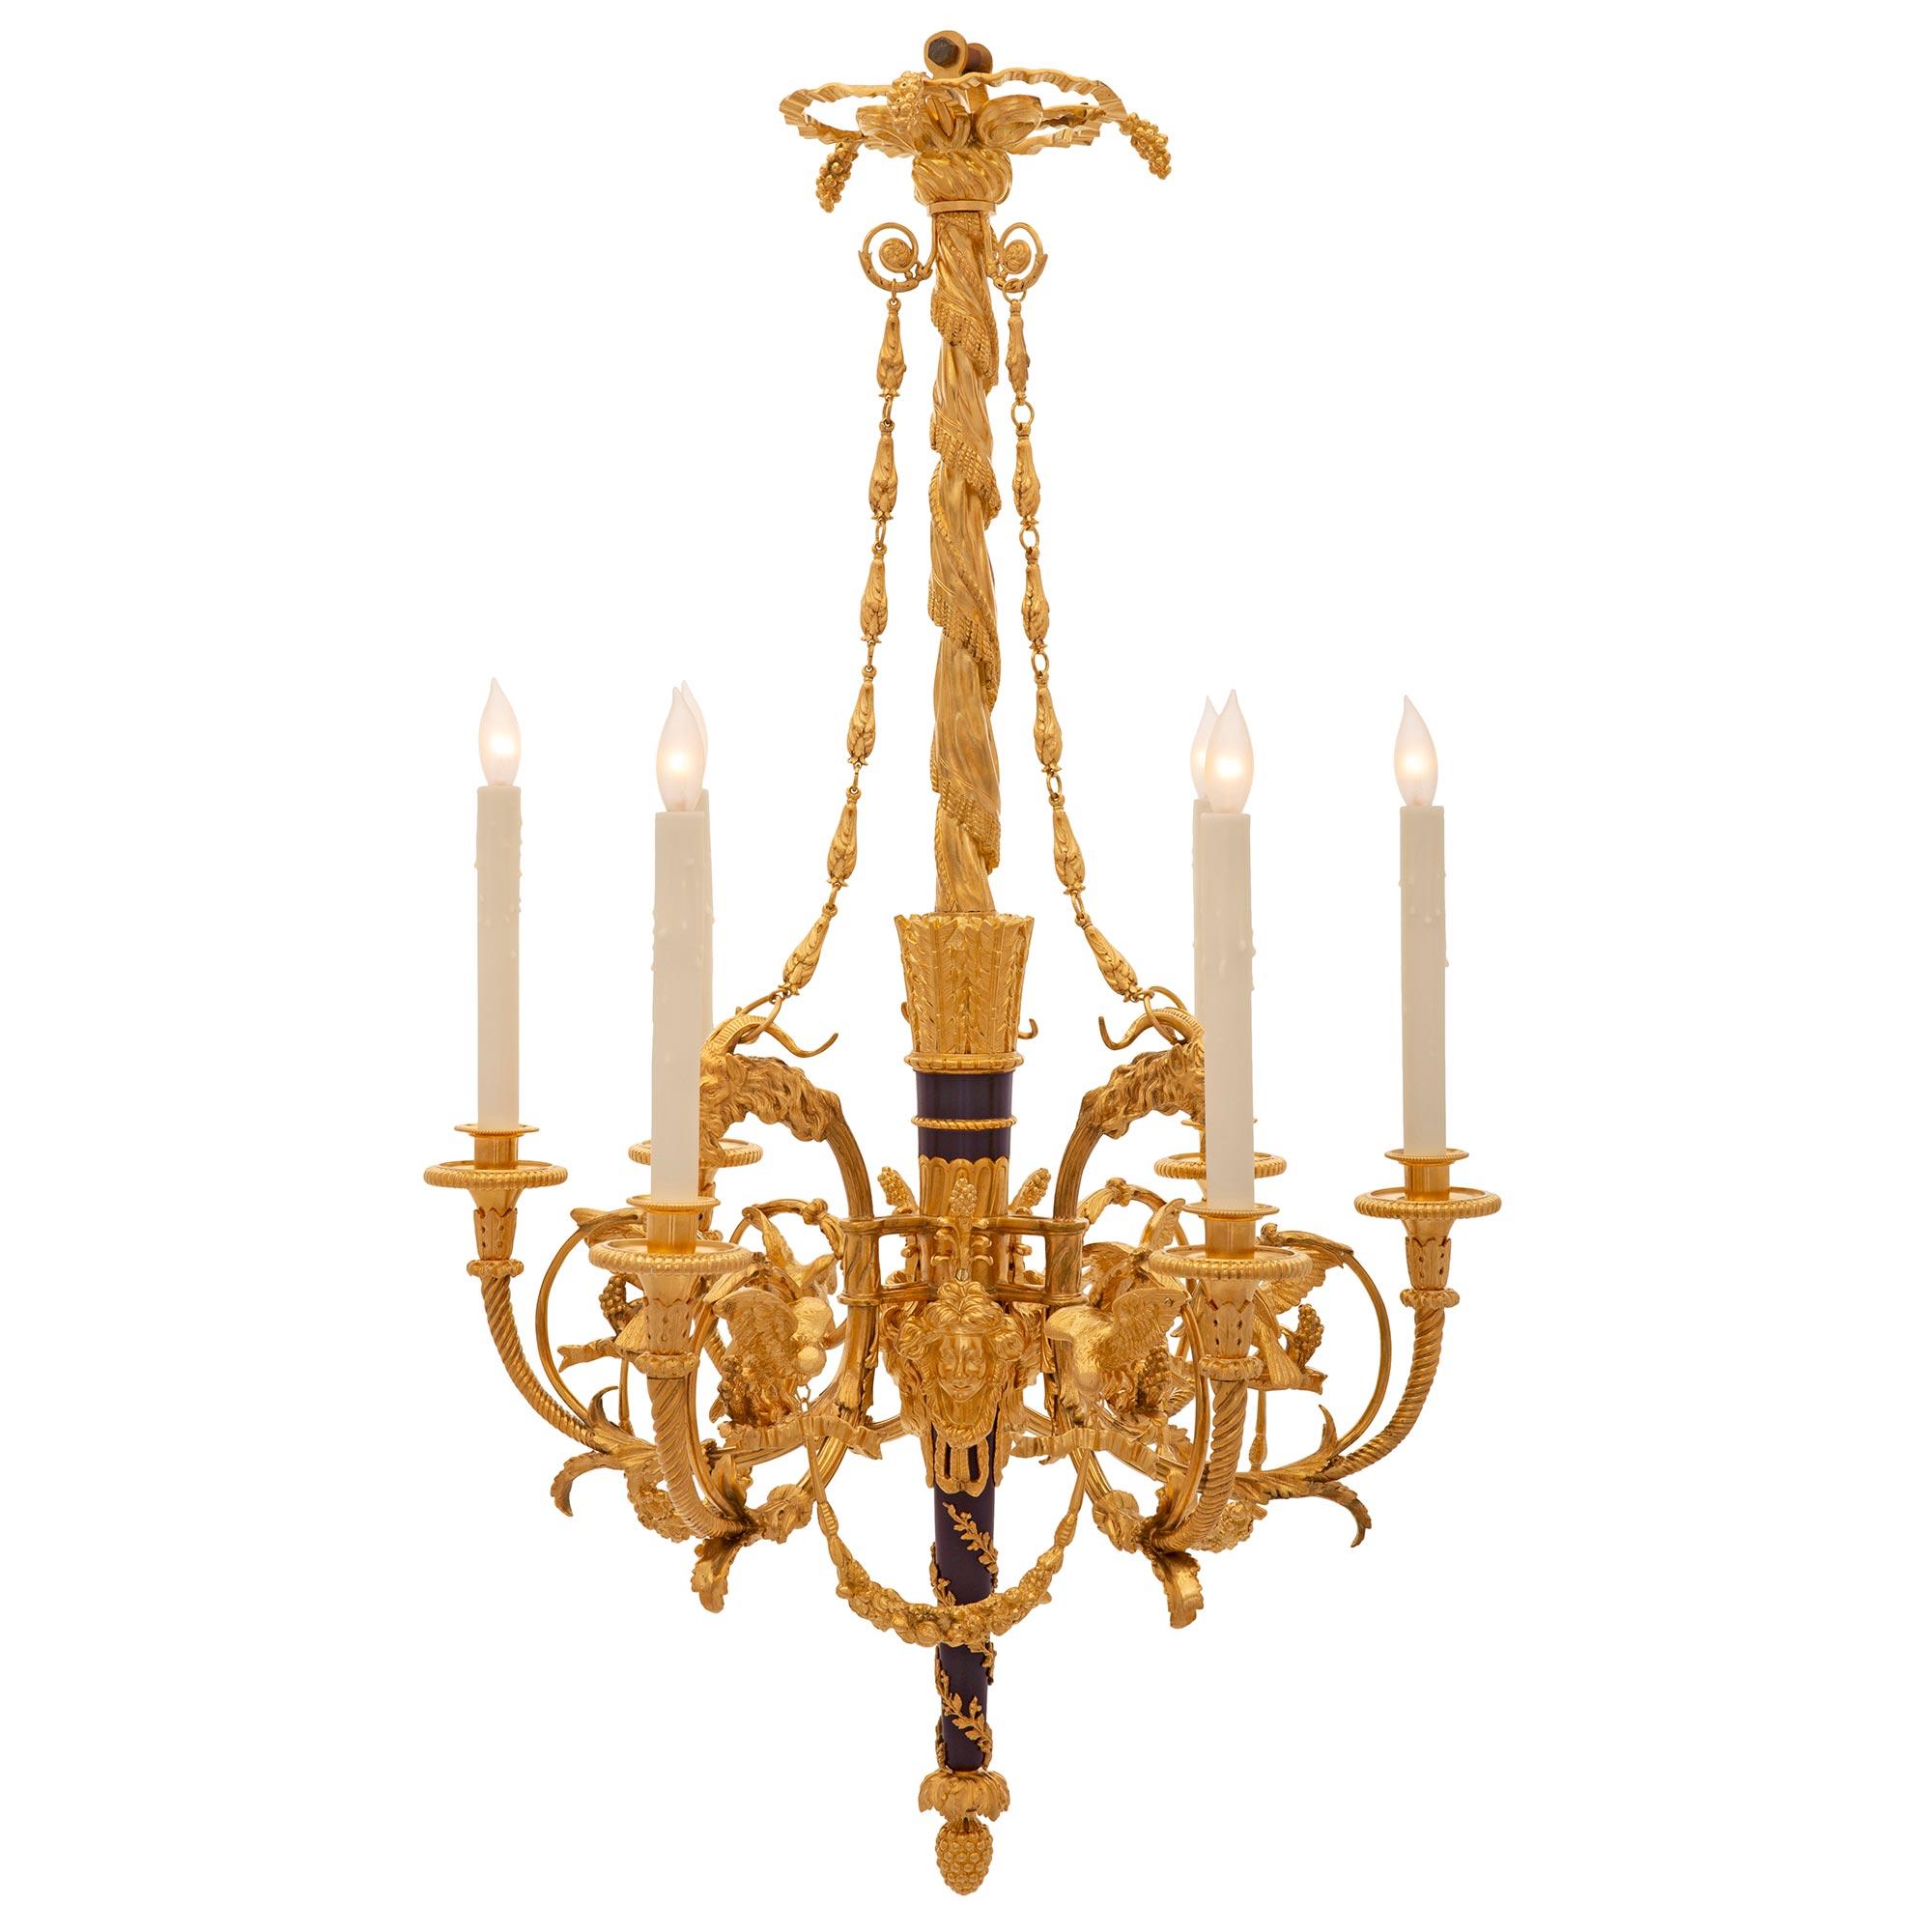 A stunning and high quality French 19th century Louis XVI st. ormolu and cobalt blue enamel chandelier. The chandelier is centered by a beautiful inverted ormolu acorn final below the elegant tapered cobalt blue enamel central fut encased with